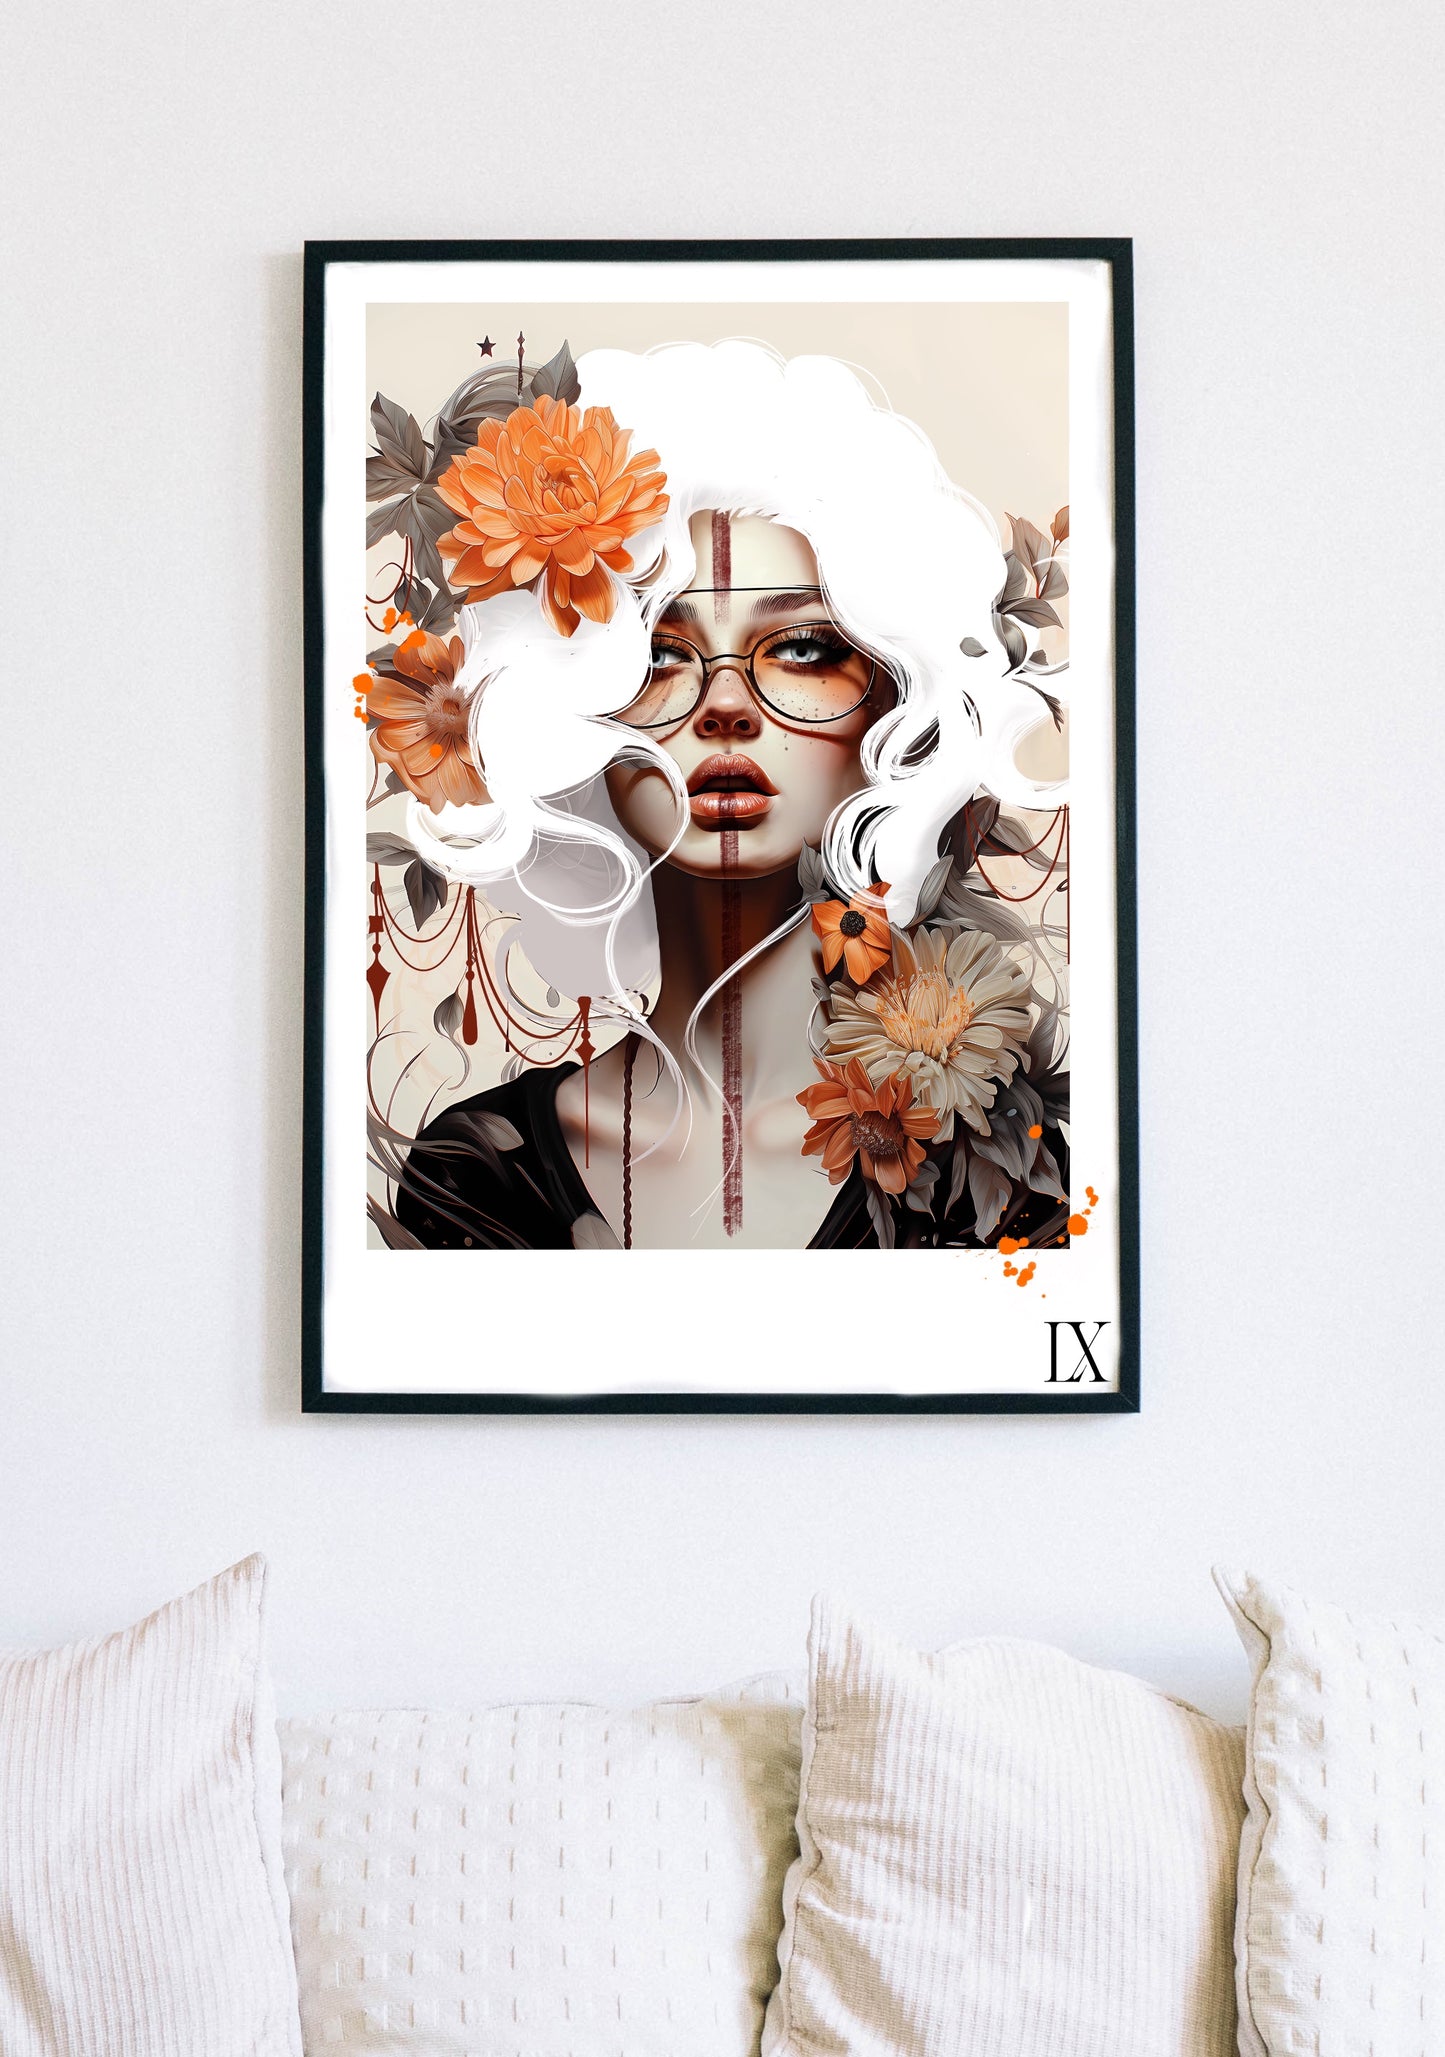 Print by Fauve Lex - Hand numbered and signed